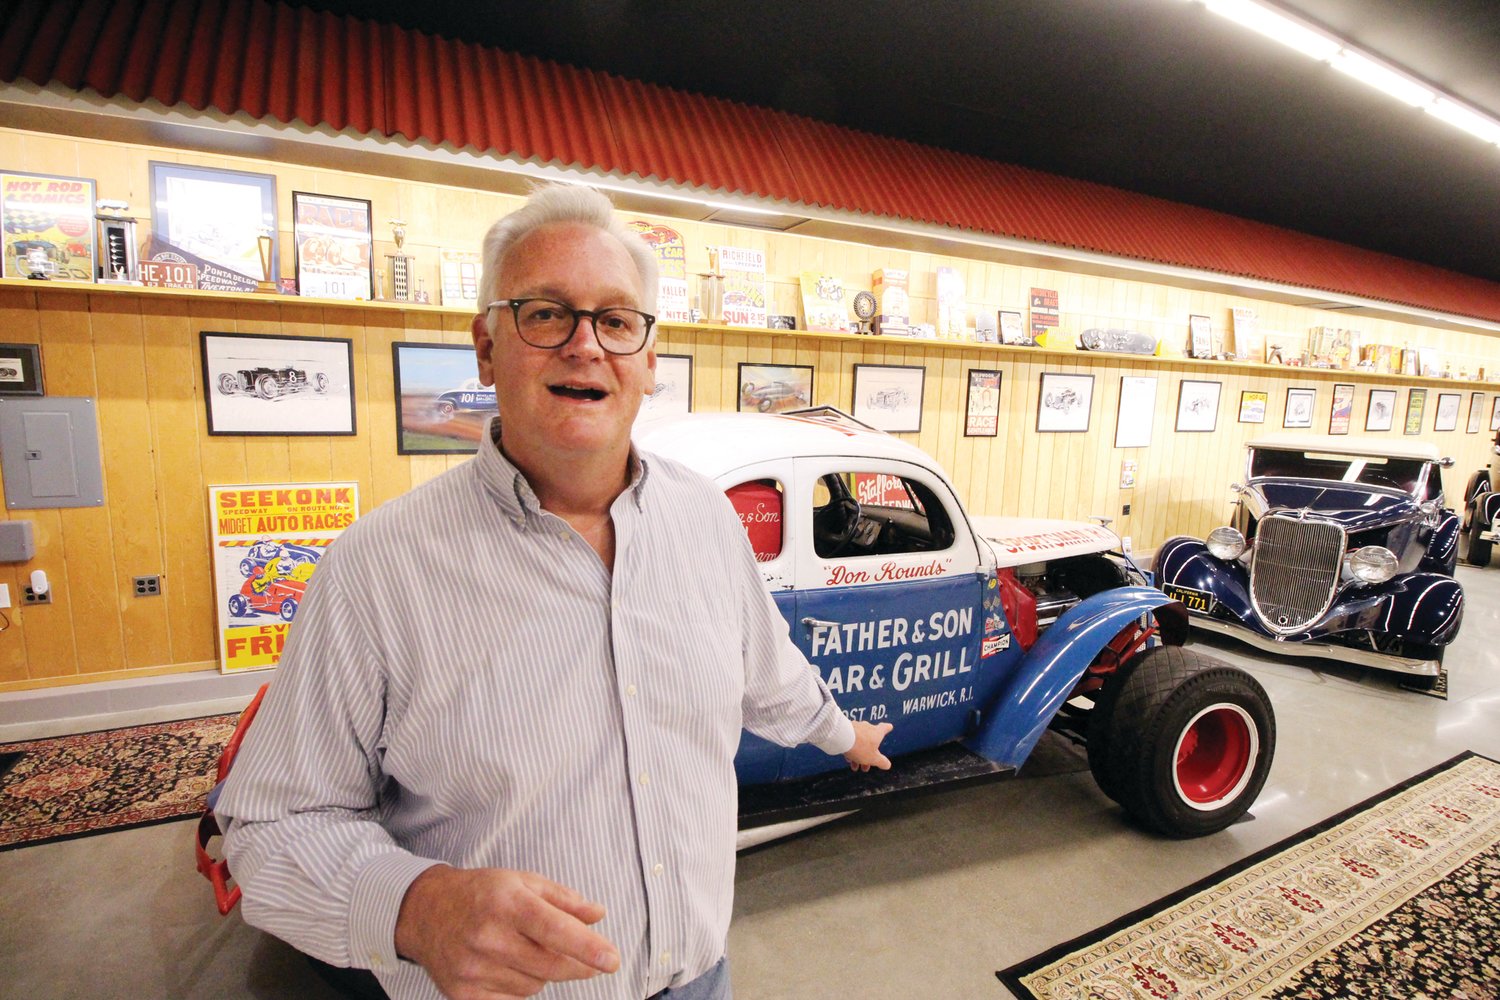 BRINGING 101 HOME: Inspired by the stories of Don Rounds, Jeff Goldstein tracked down the car he raced and brought it home to Warwick.